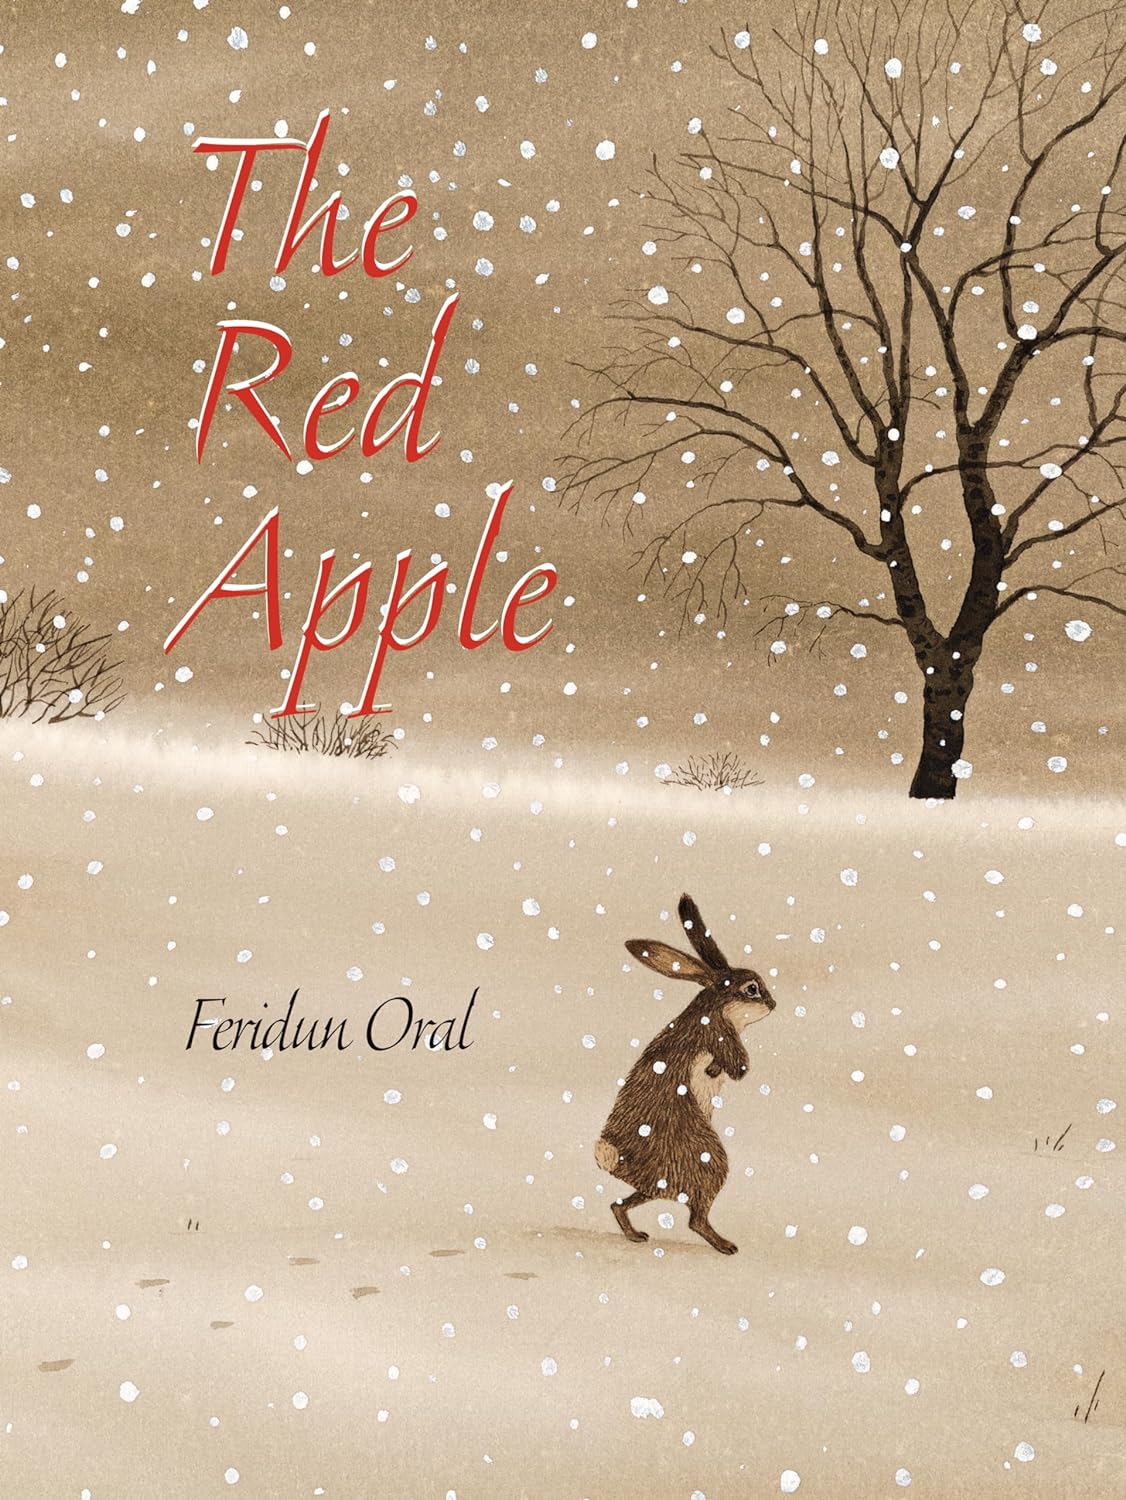 Cover for The Red Apple featuring a rabbit with his arms crossed and appearing cold walking through a dreary beige snowy landscape with footsteps trailing him in the snow. The bright red title with white accents contrasts with the beige background.